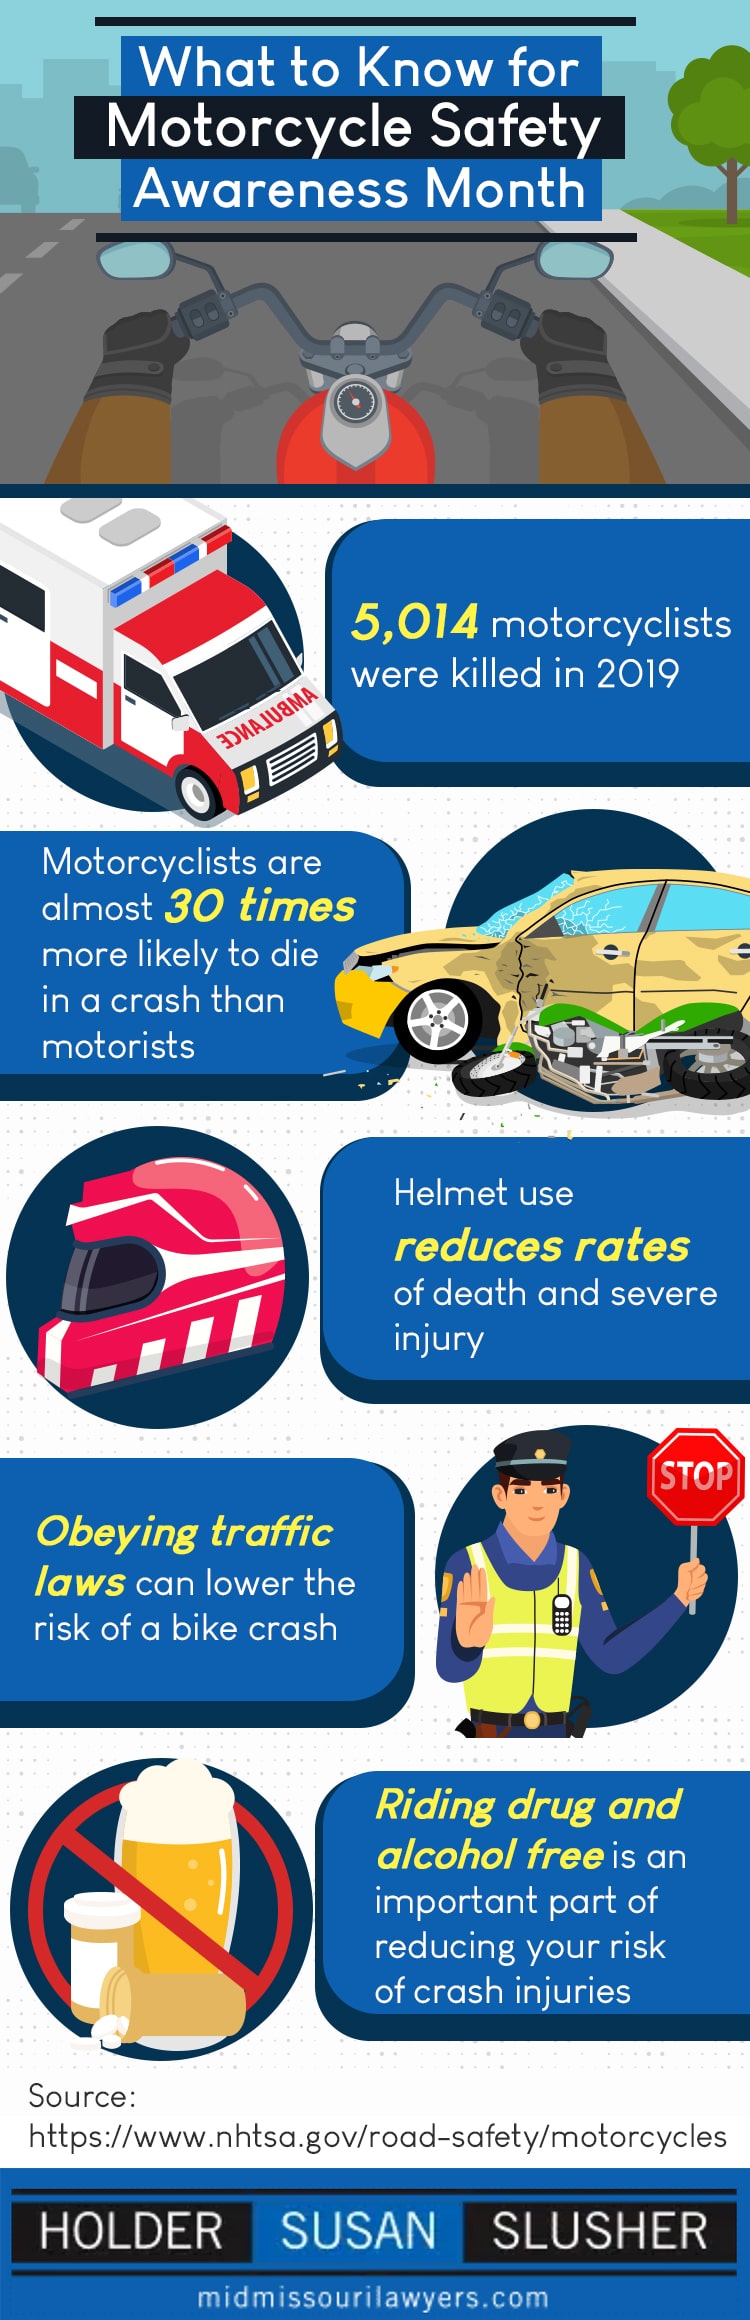 Infographic: What to know for motorcycle safety awareness month